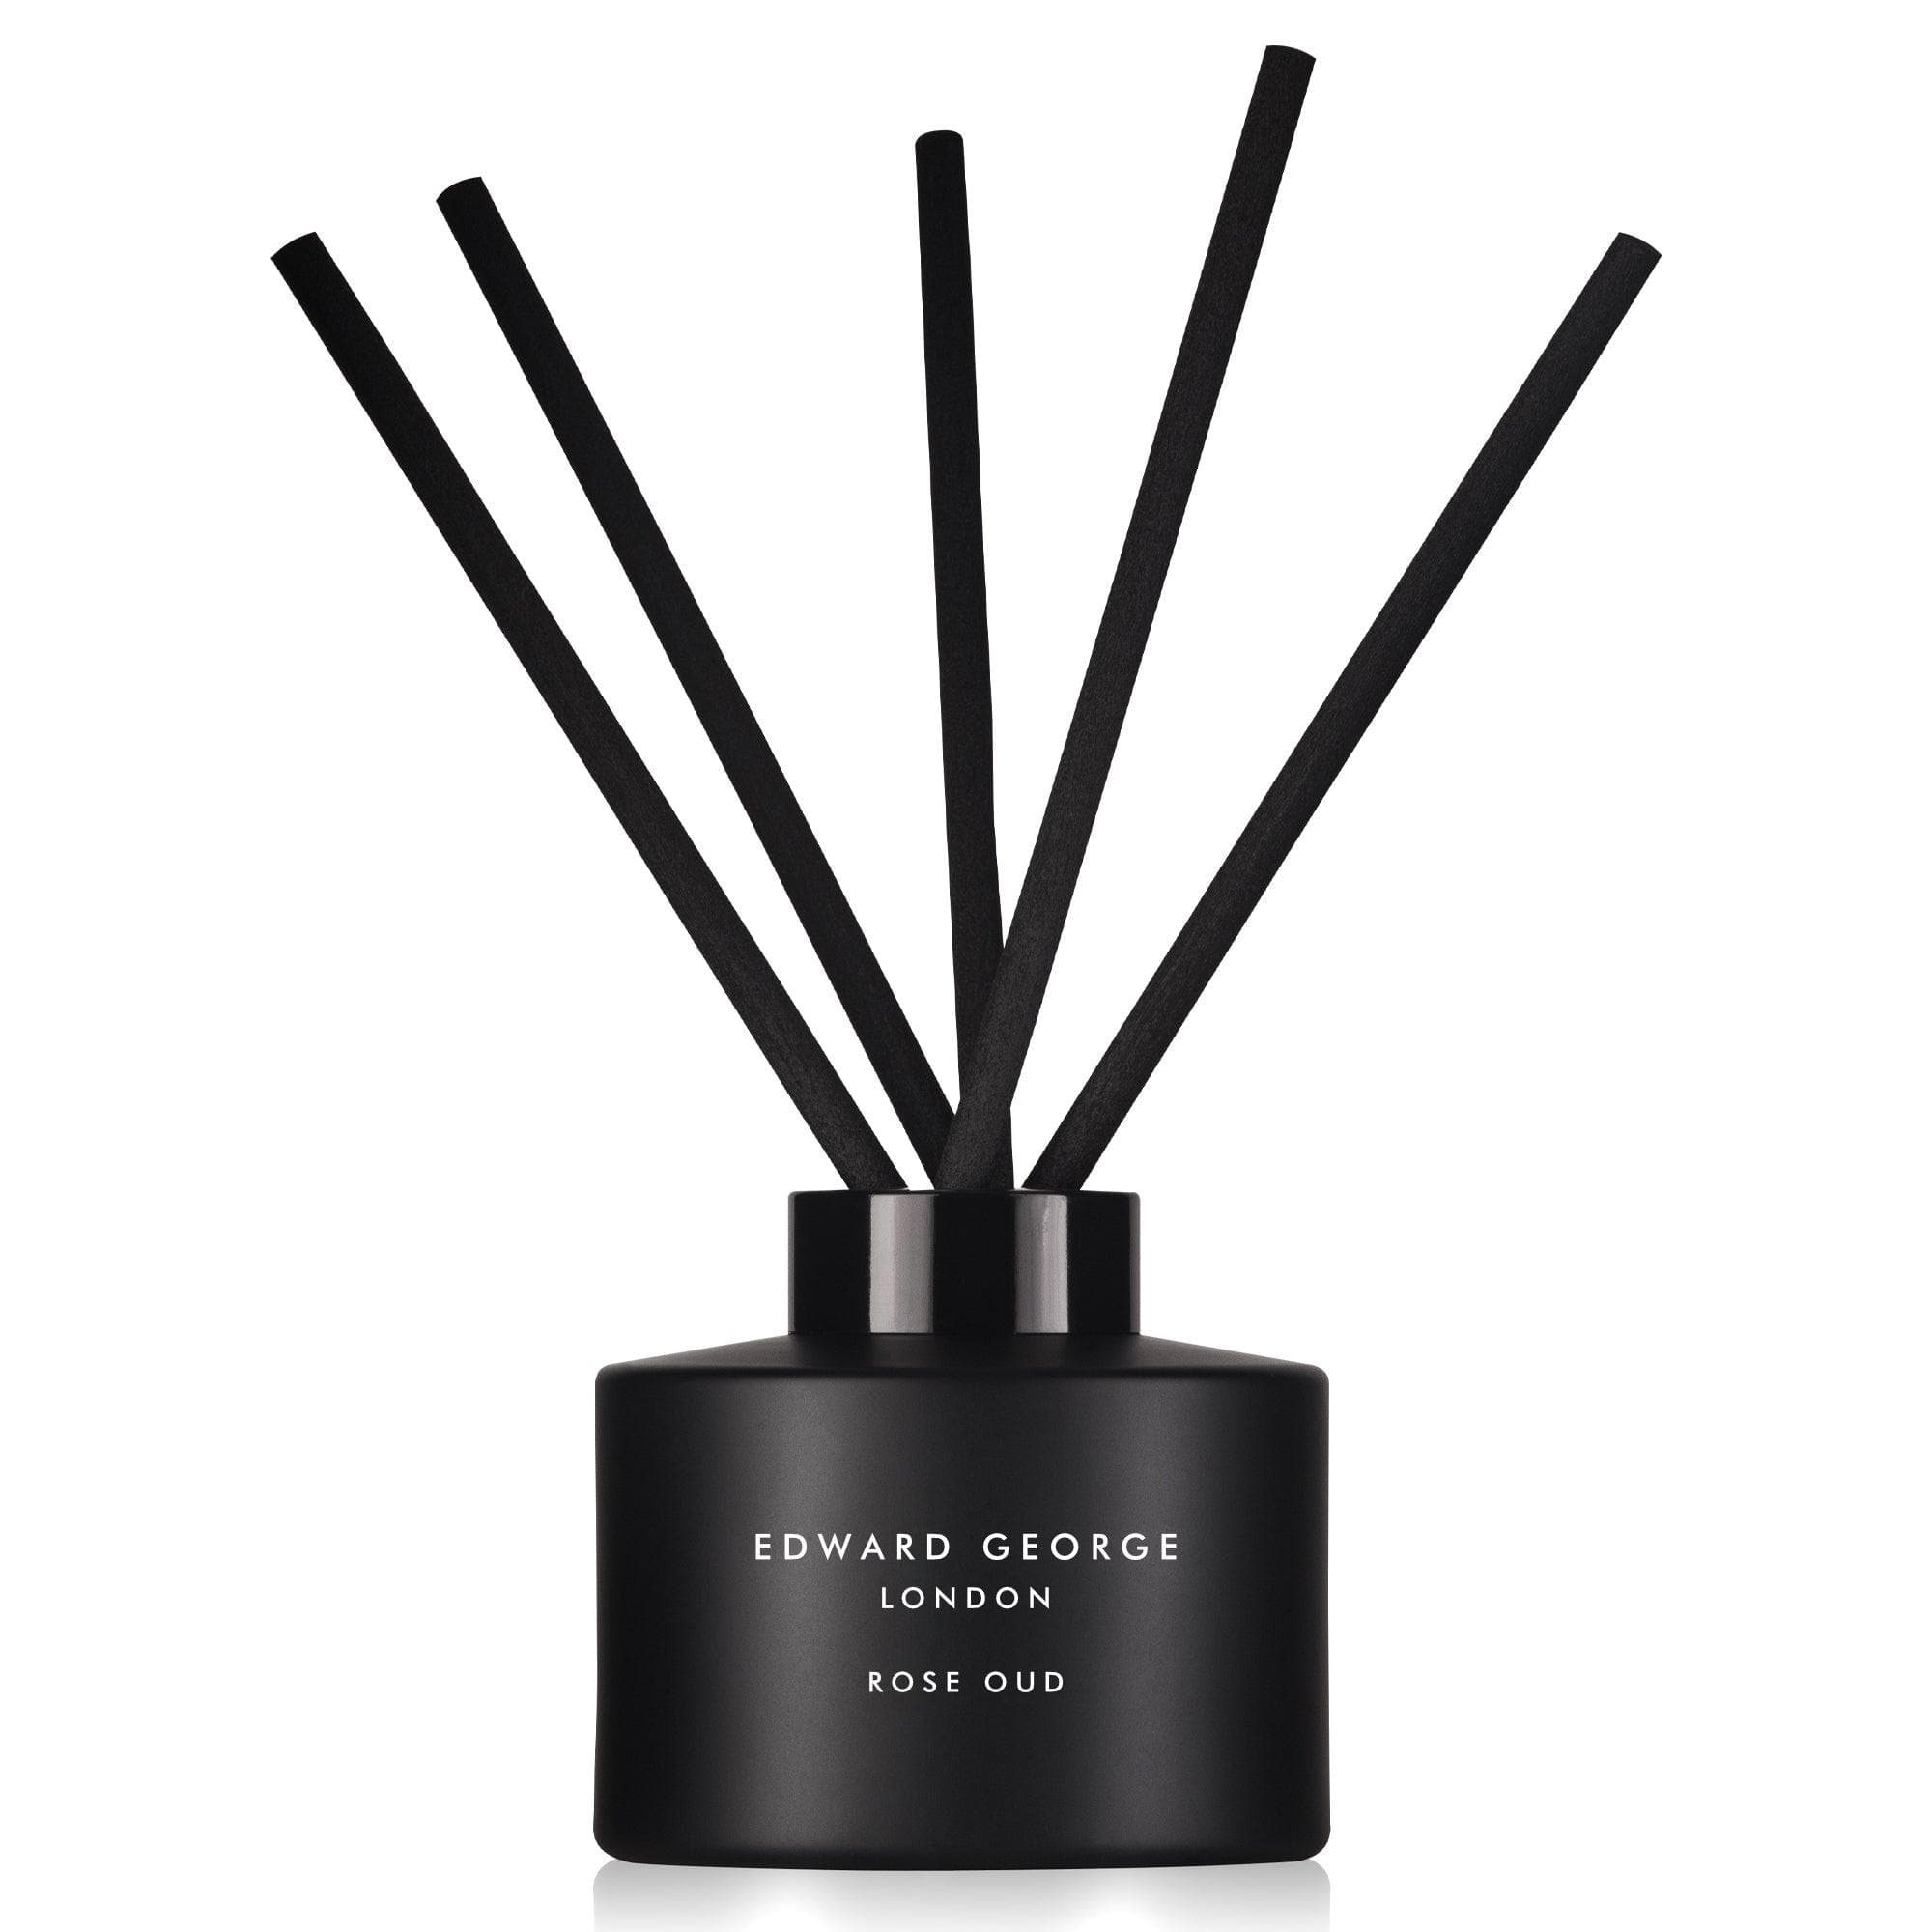 rose oud reed diffusers refills home fragrance decor room edward george london infographic luxury gift ritual scented england sticks scent oil diffuser refill women men black